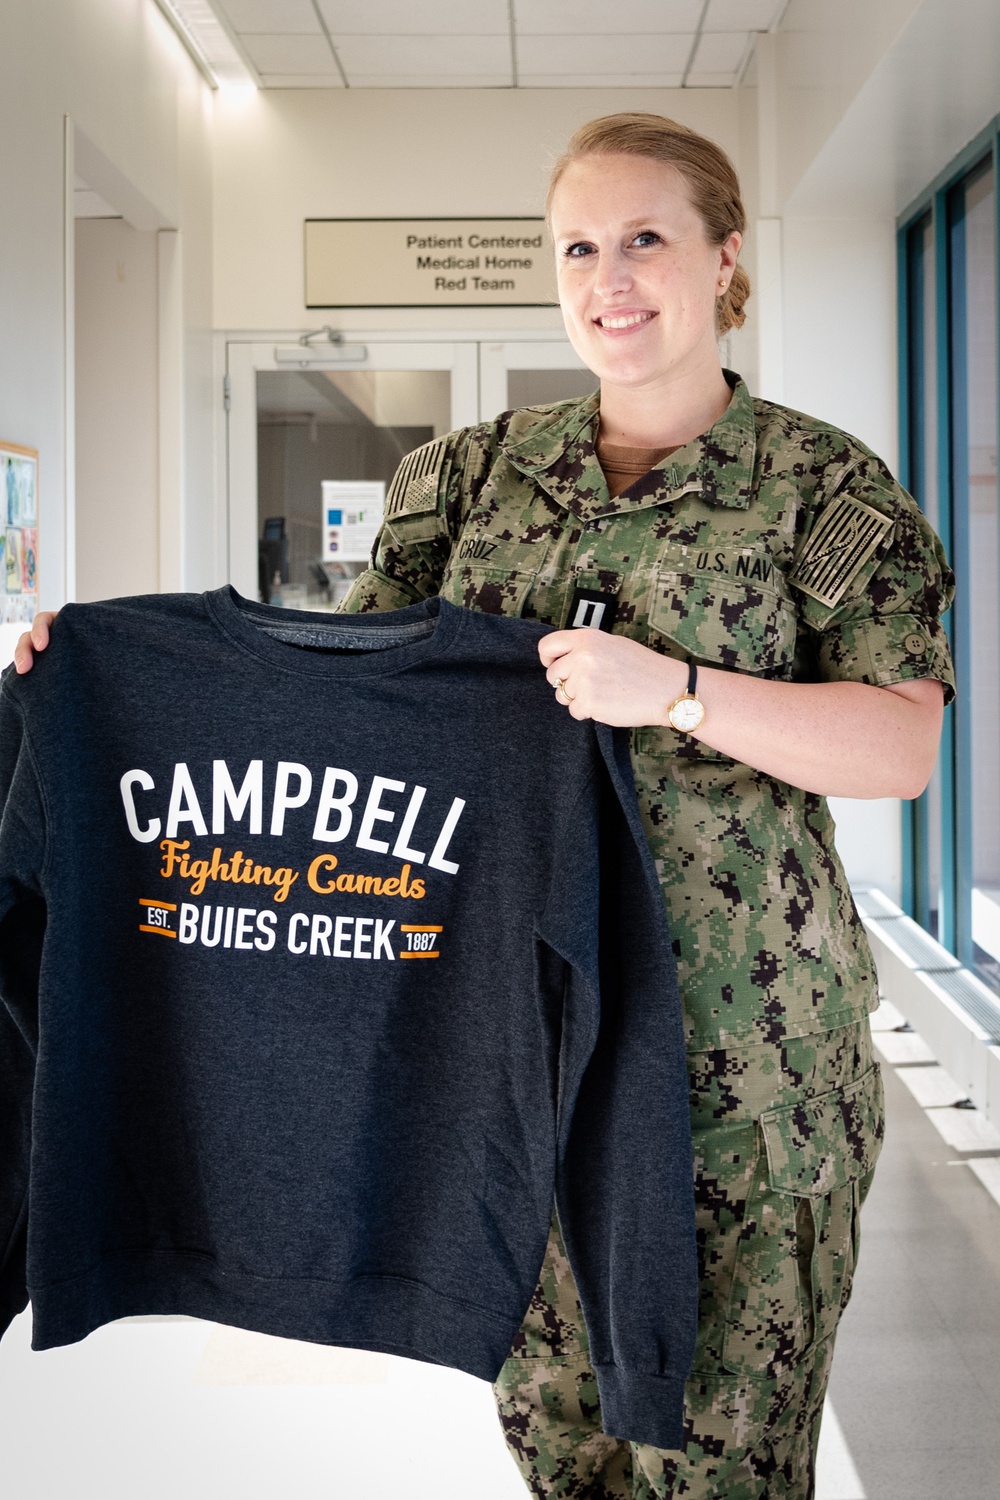 “You Grow Where You Are Planted” Cherry Point Nurse Departs for New Role in Public Health